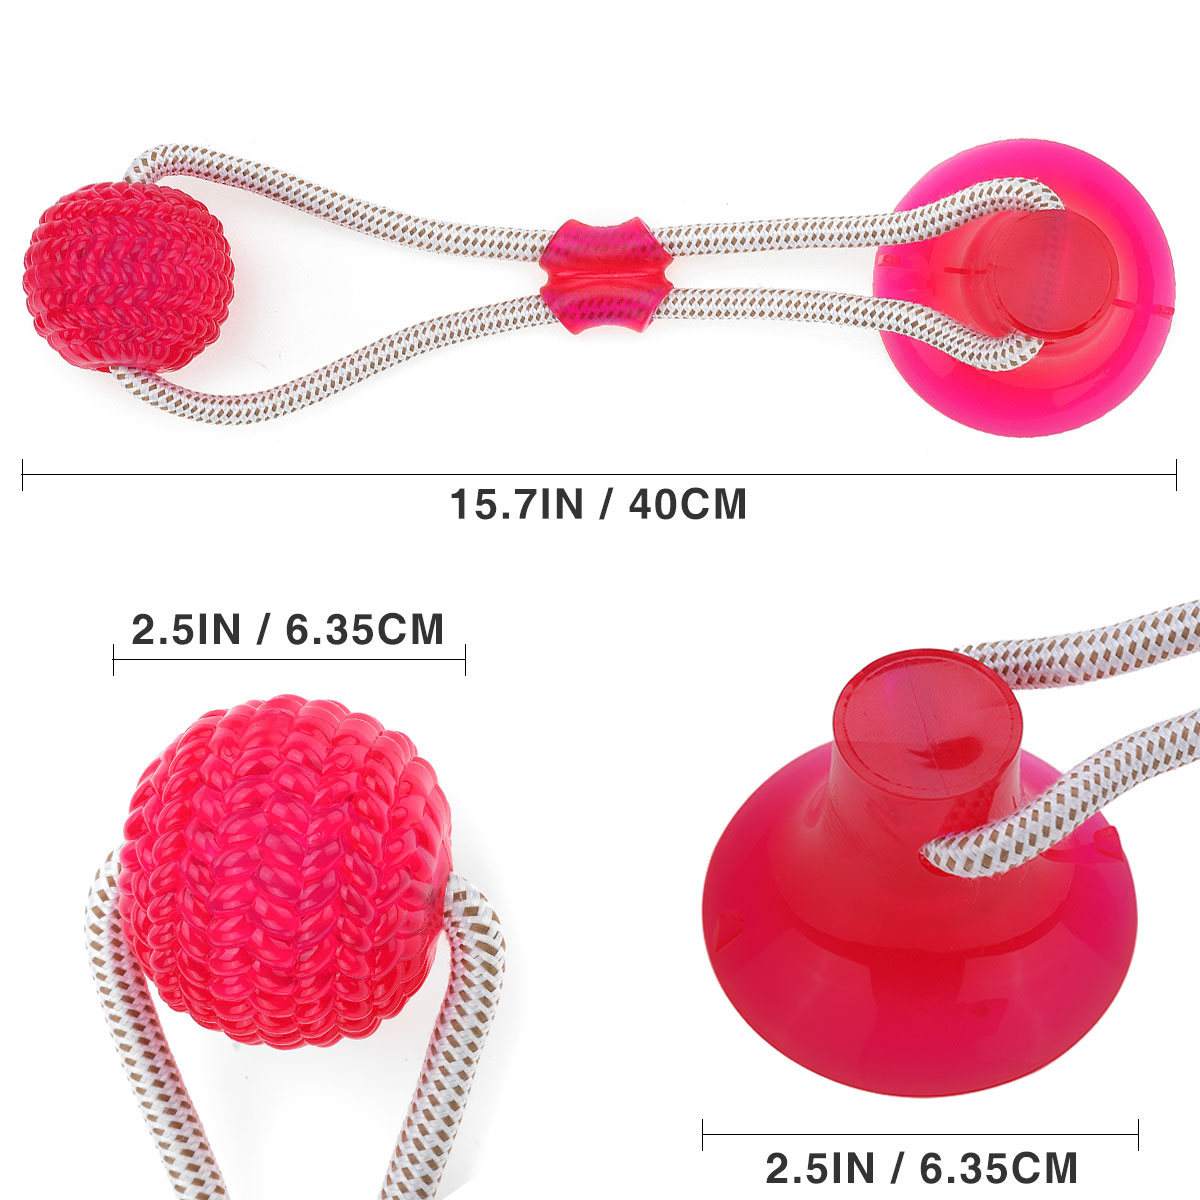 Pet-Molar-Bite-Toy-Suction-Cup-Rubber-Ball-Dog-Chew-Toys-Interactive-Puppy-Molar-Training-Rope-Tug-R-1900175-7